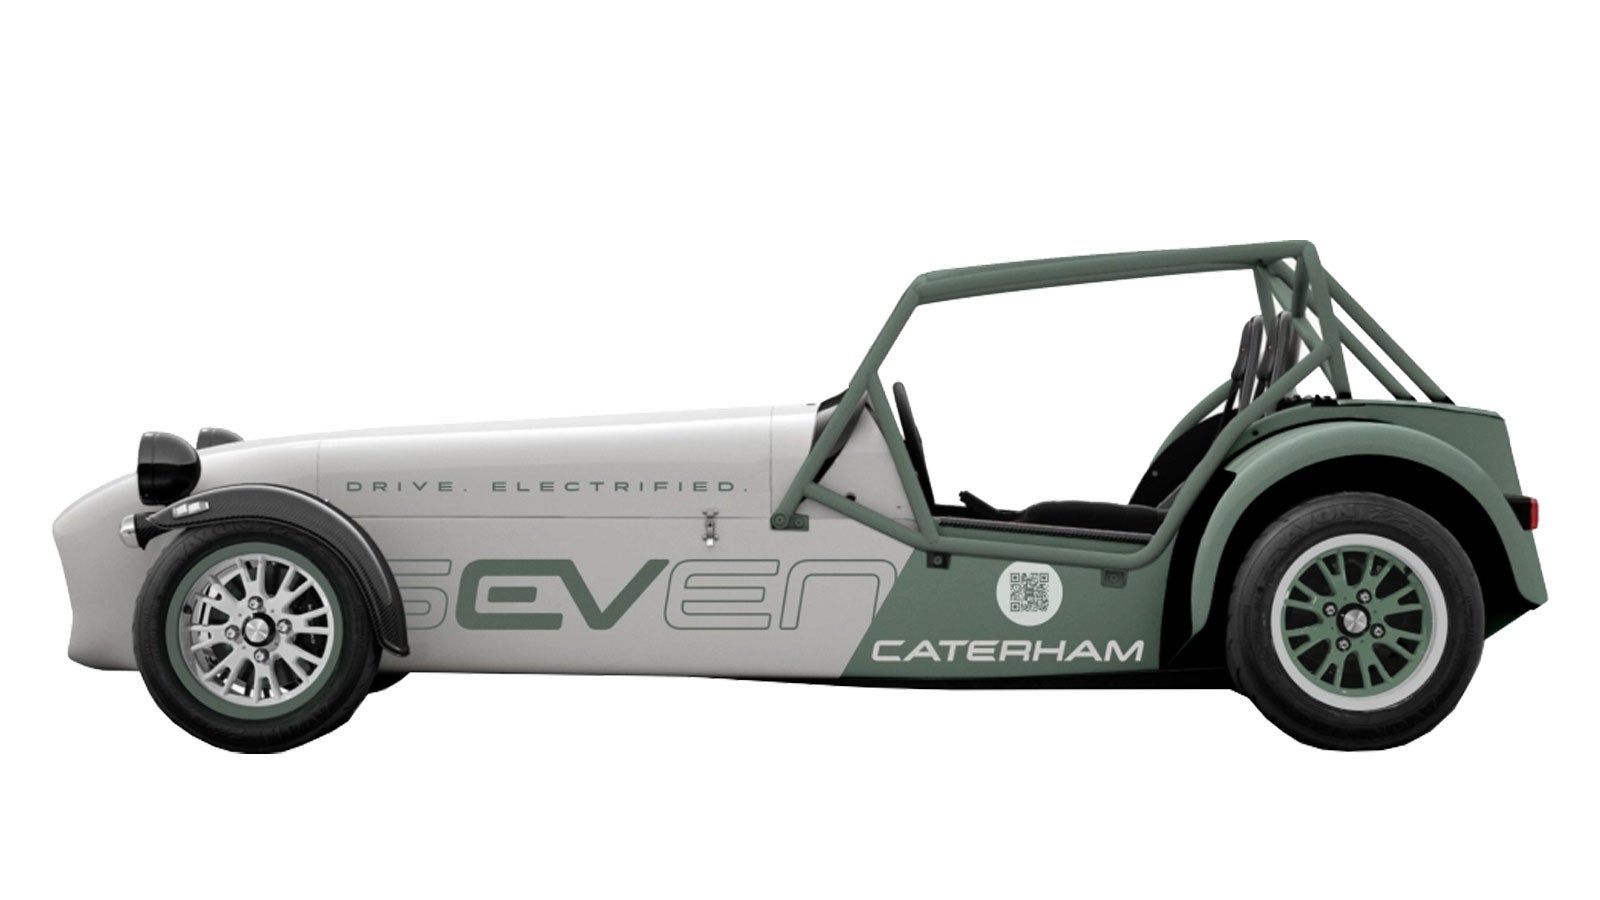 Caterham Built a 236HP Electric Track Car That Runs for 20 Minutes